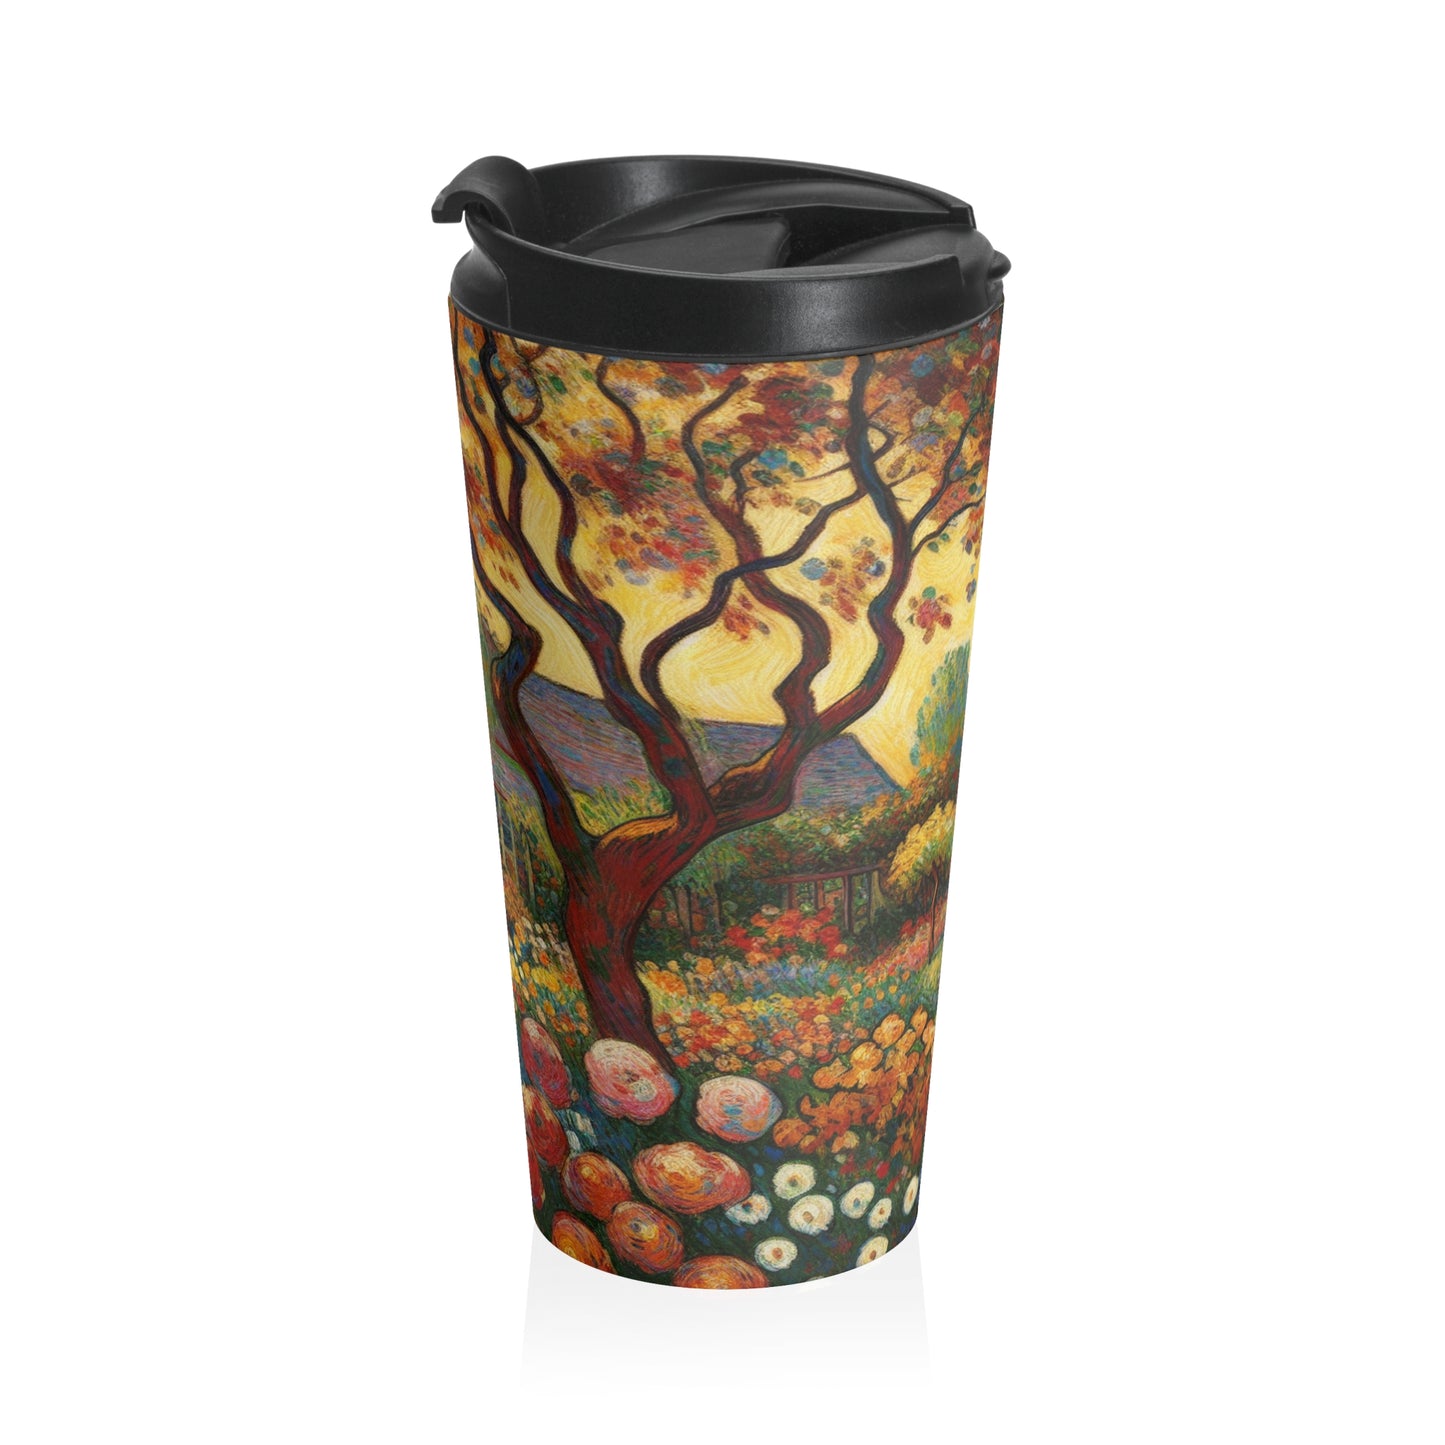 "Fauvist Garden Oasis" - The Alien Stainless Steel Travel Mug Fauvism Style